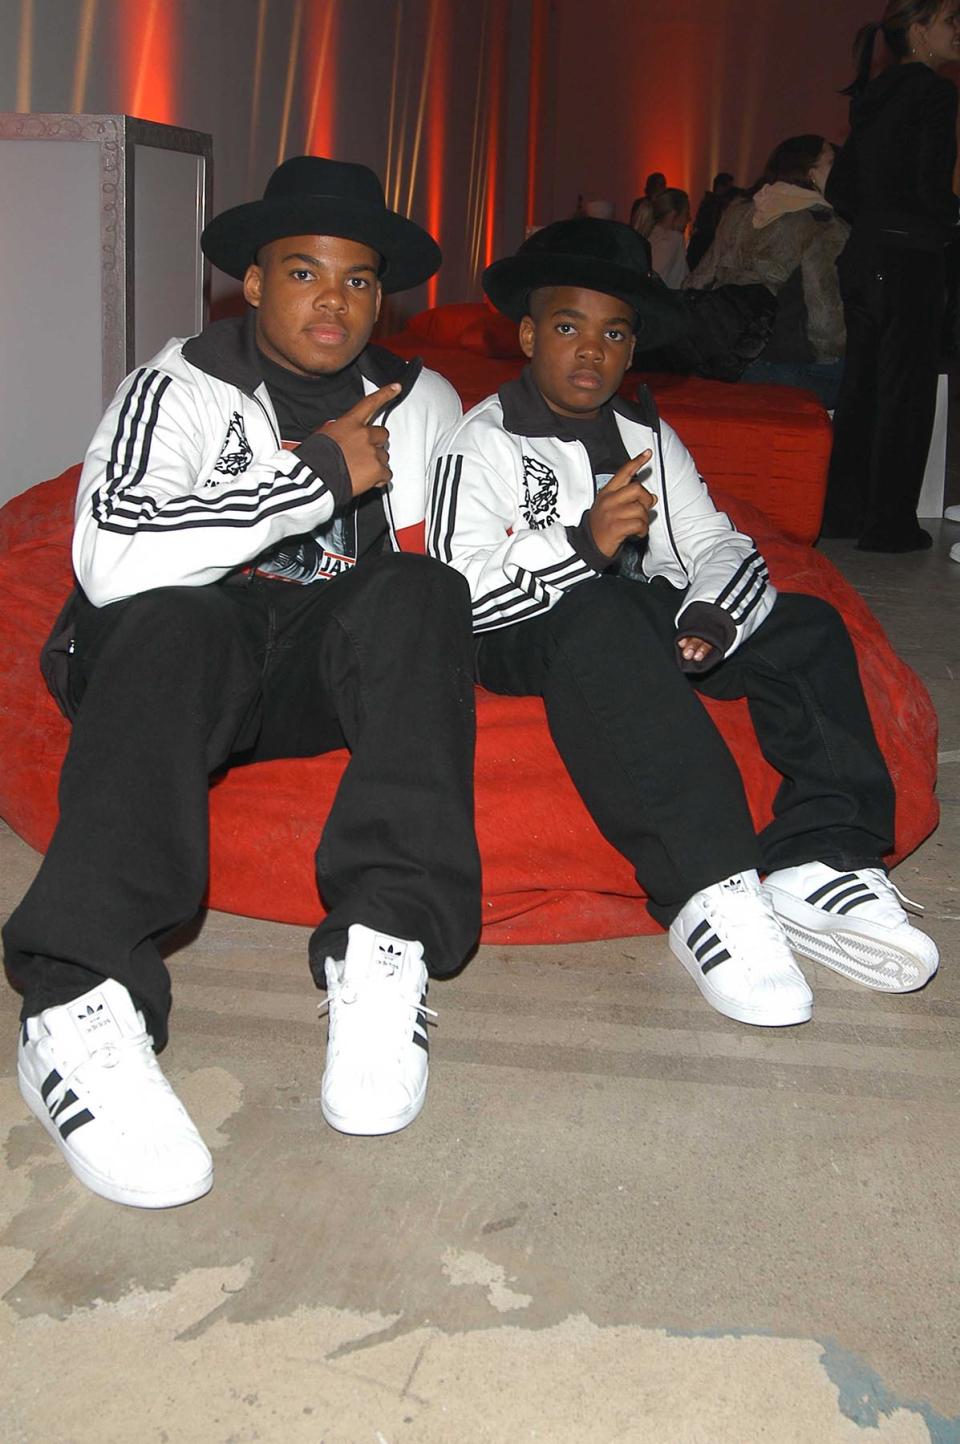 NEW YORK, NY - FEBRUARY 25: TJ Mizell and Jesse Mizell attend Adidas presents benefit auction and dinner for Jam Master Jay Foundation for Music and the 35th Anniversary of the Adidas Superstar at Skylight Studio on February 25, 2005 in New York City. (Photo by Chance Yeh /Patrick McMullan via Getty Images)